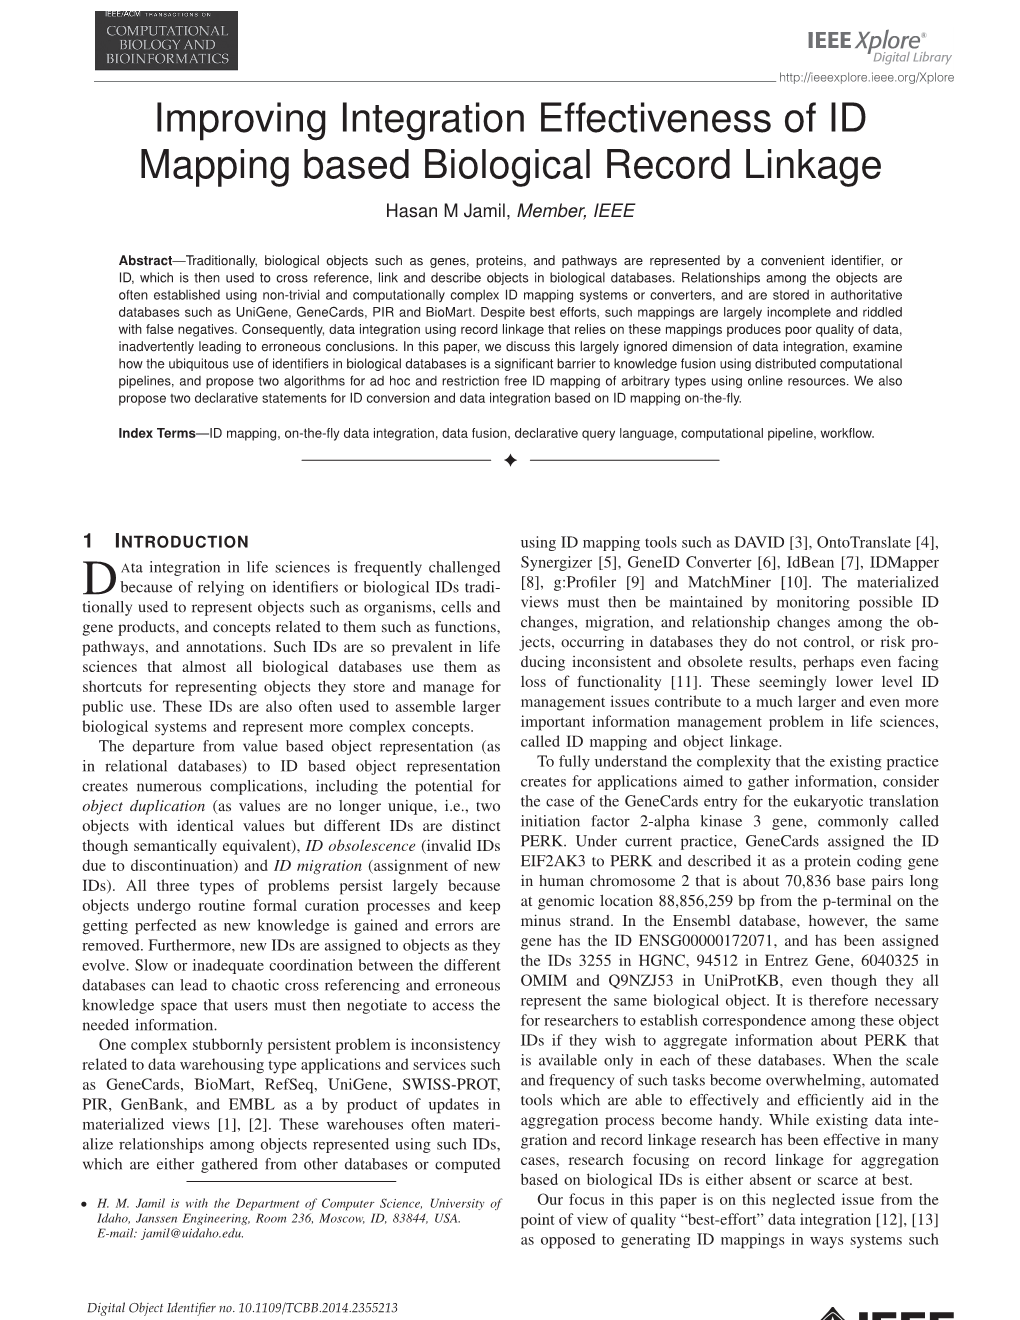 Improving Integration Effectiveness of ID Mapping Based Biological Record Linkage Hasan M Jamil, Member, IEEE